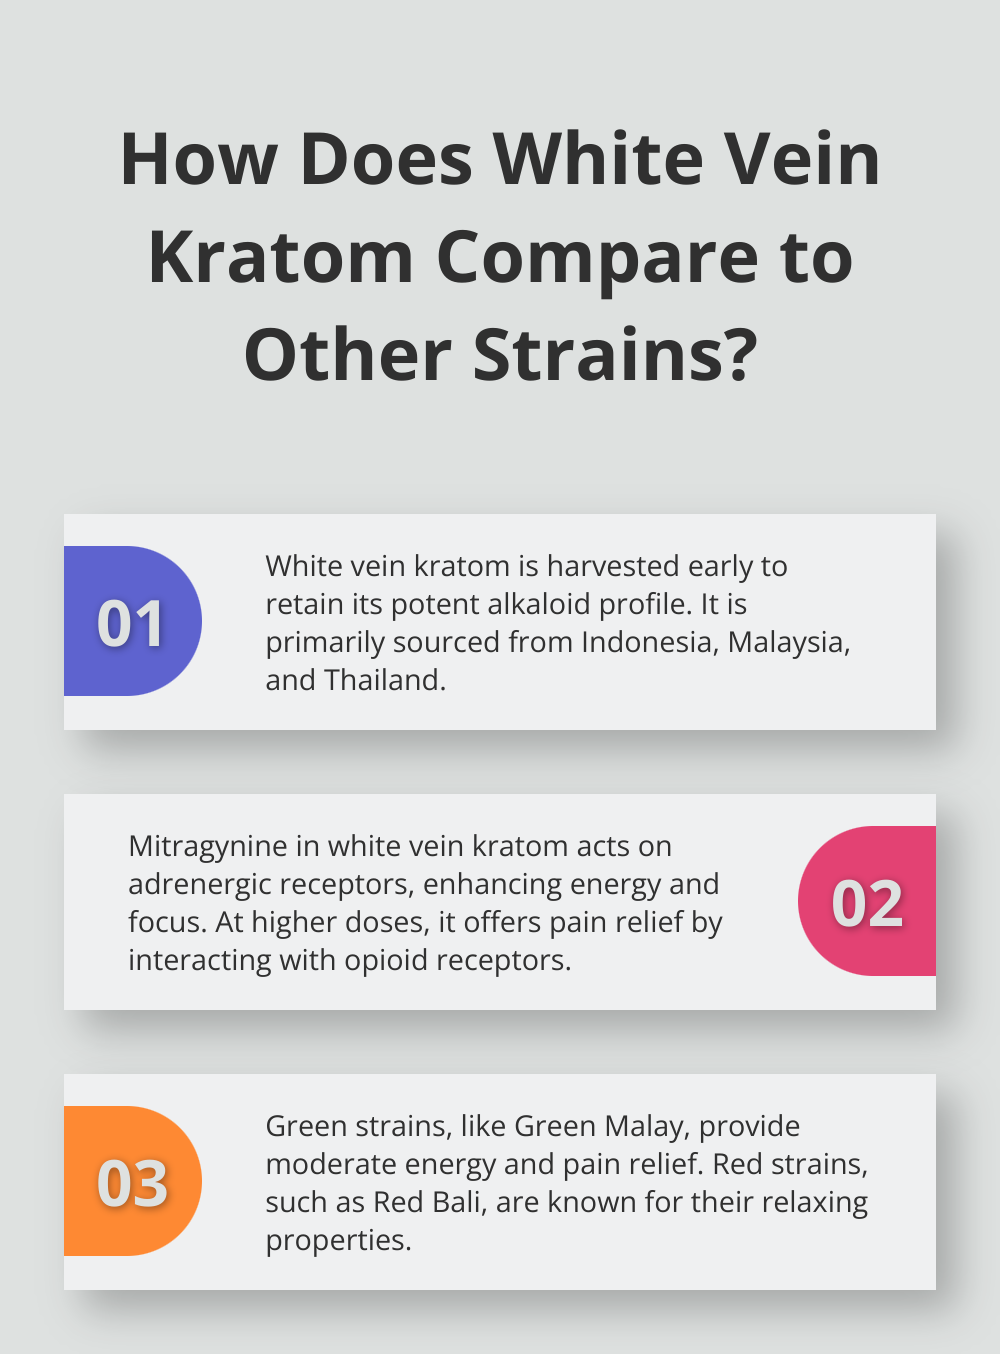 Fact - How Does White Vein Kratom Compare to Other Strains?